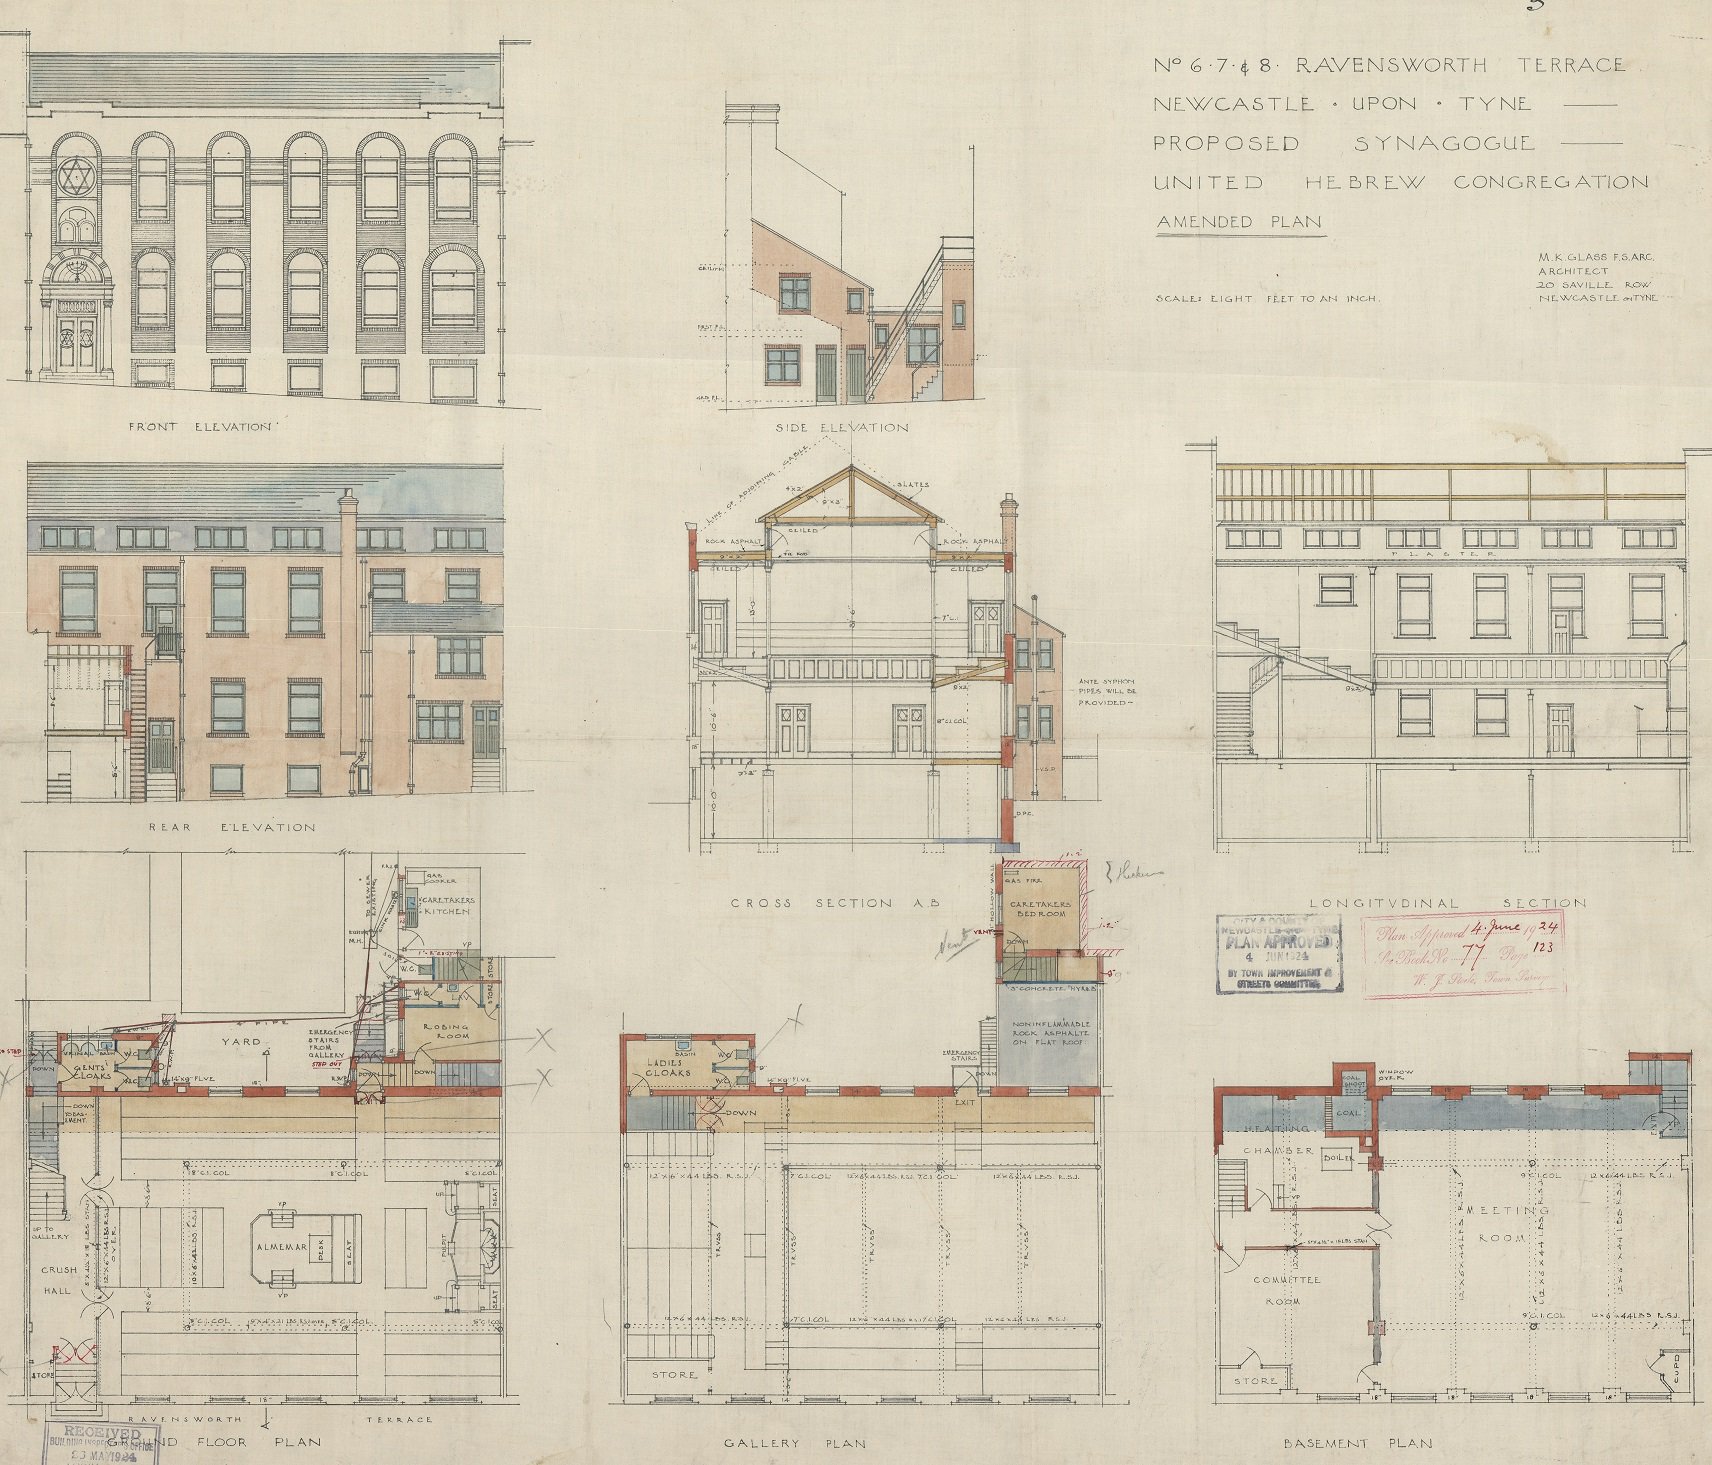 Building plan, Ravensworth Terrace Synagogue, Newcastle; approved June 1924